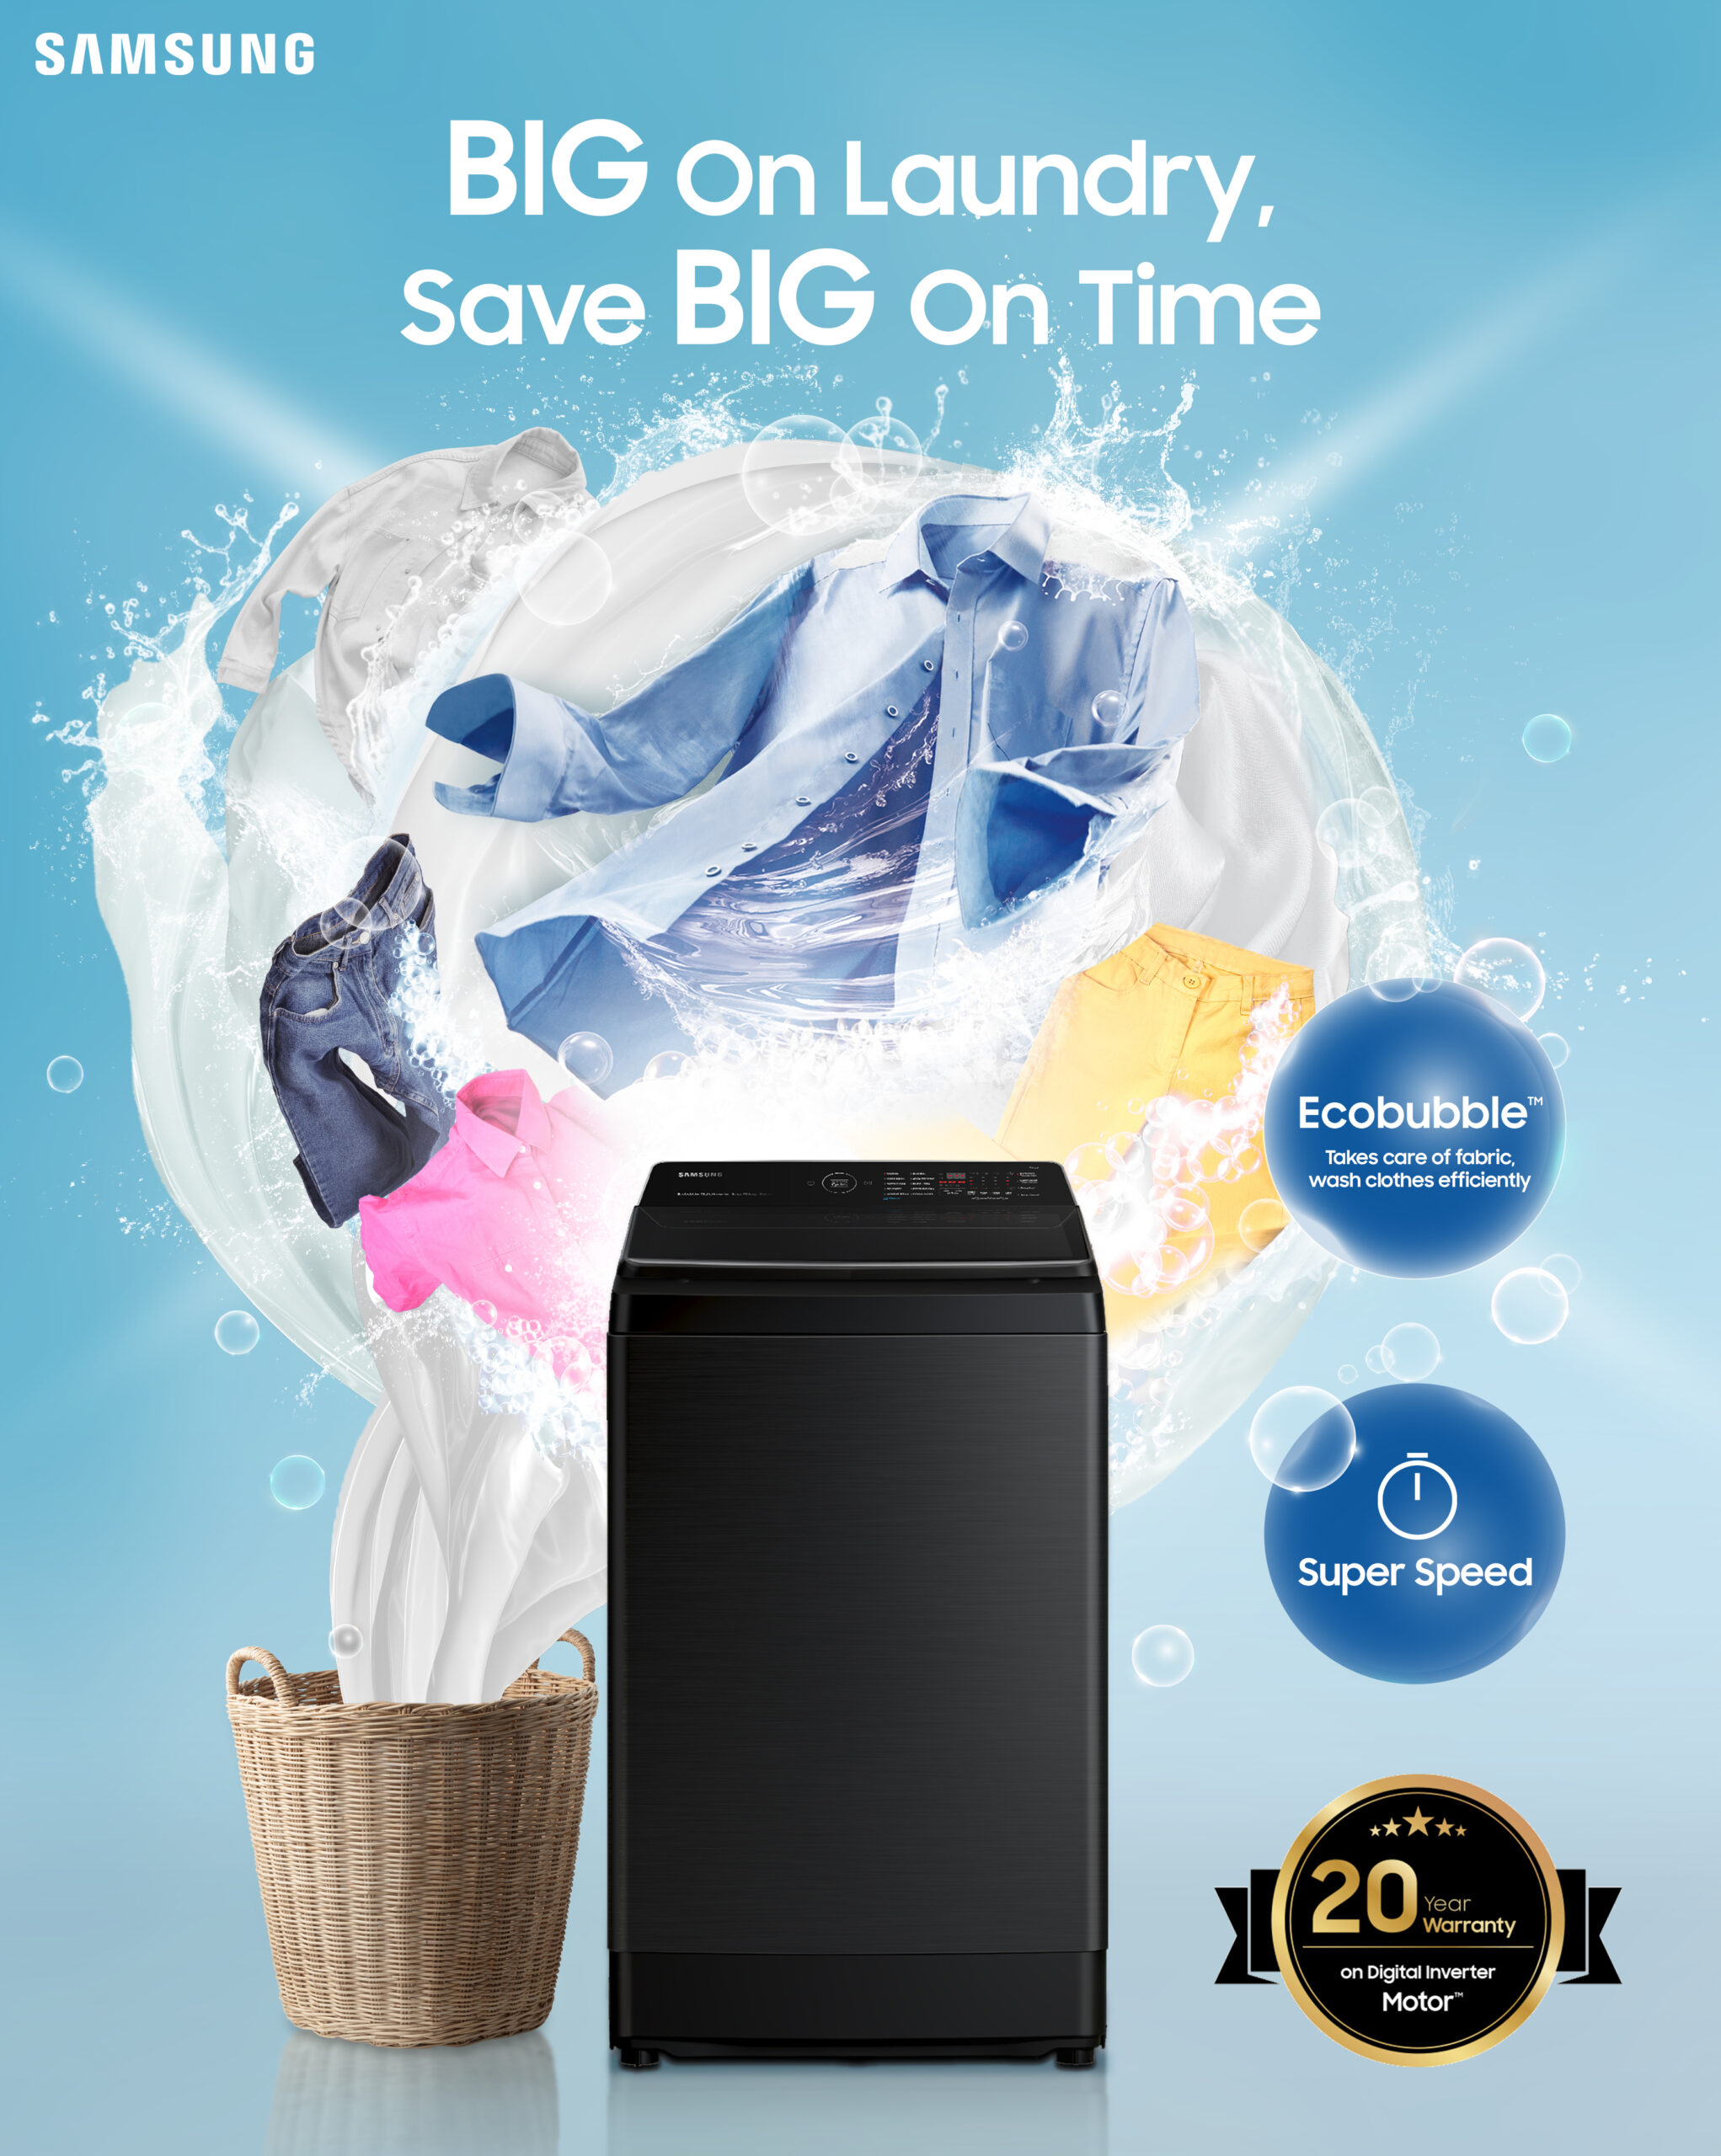 5 Ways Switching to the Samsung Topload Washing Machine Is the Smart Choice for Your Home